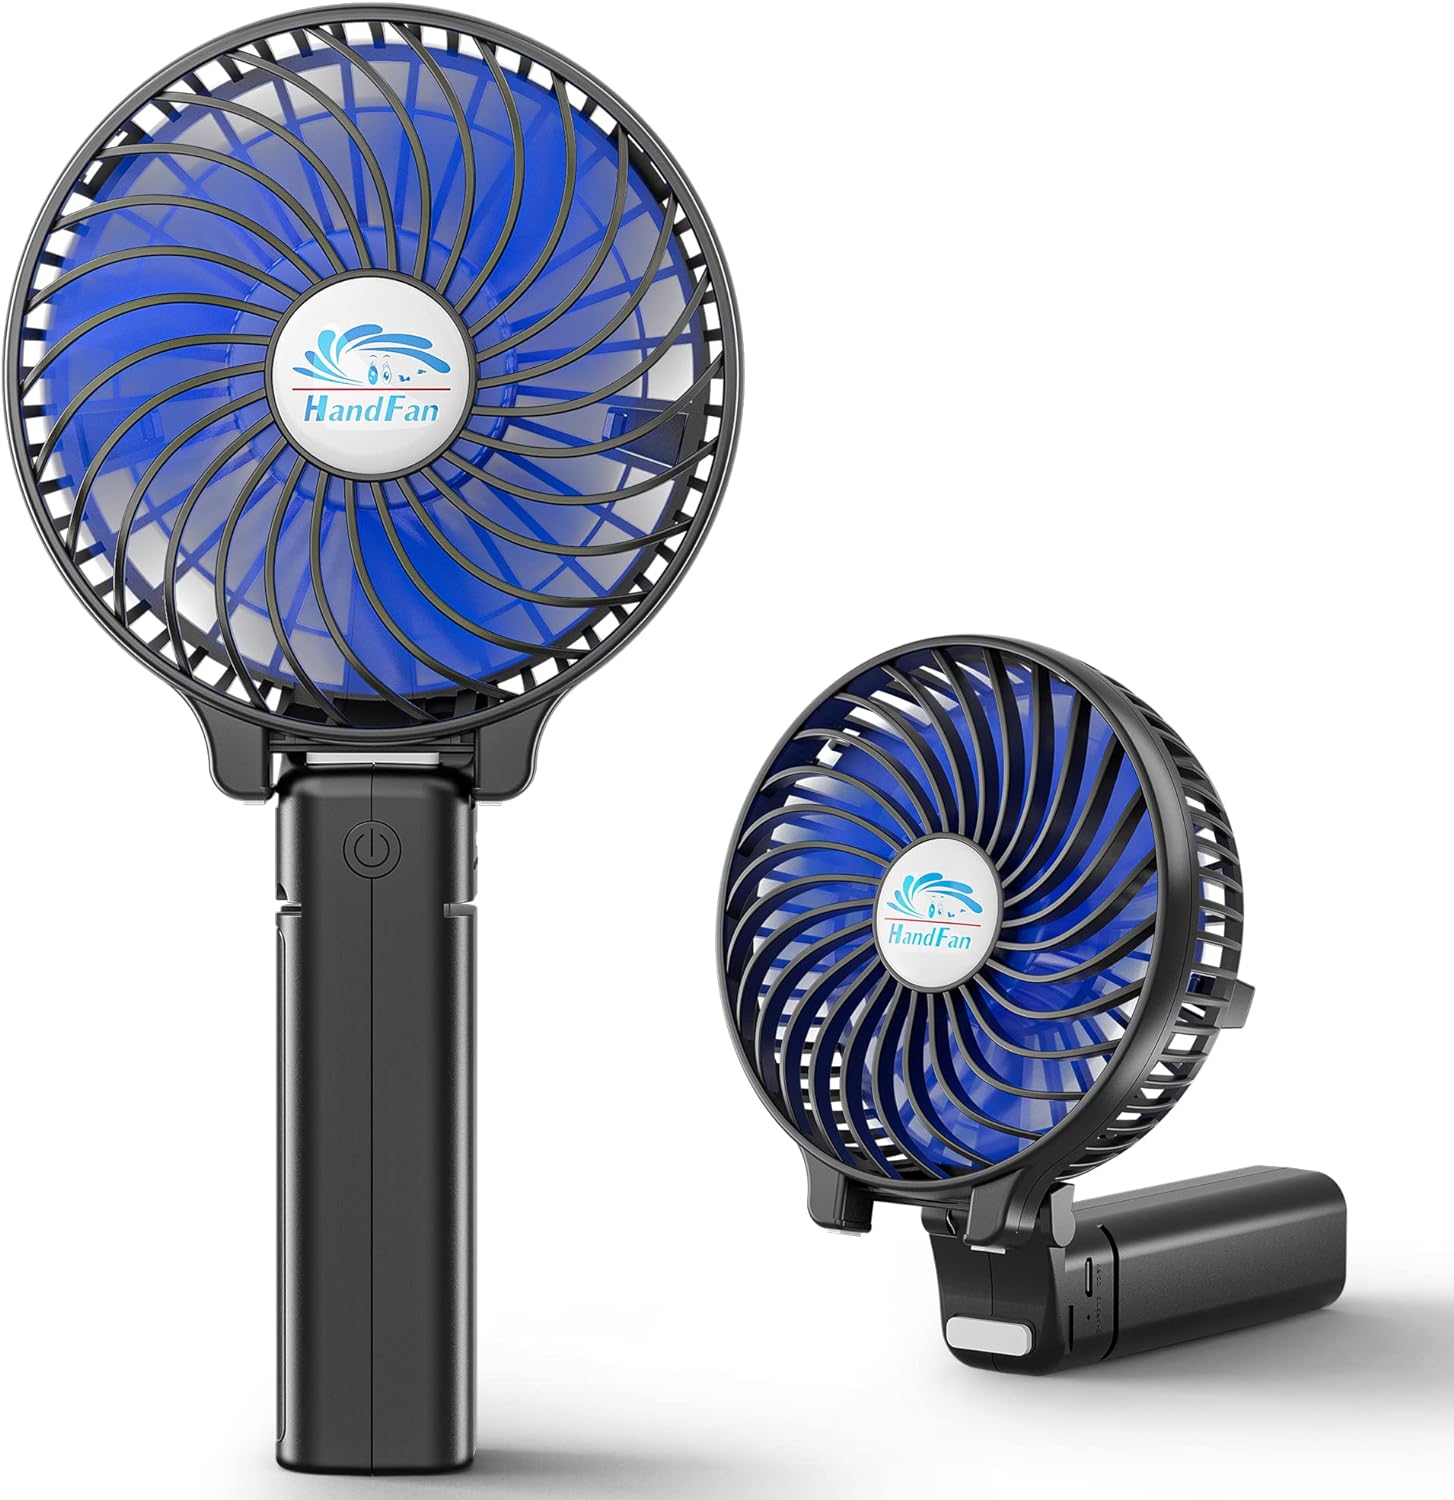 HandFan Portable Handheld Fan, Mini Personal Fan, Battery Operated Cooling Rechargeable Fan, 180 Foldable Small Hand Fan, USB Powered, for Home, Office, Outdoor, Hiking, Travel, Stroller(Black&Blue)